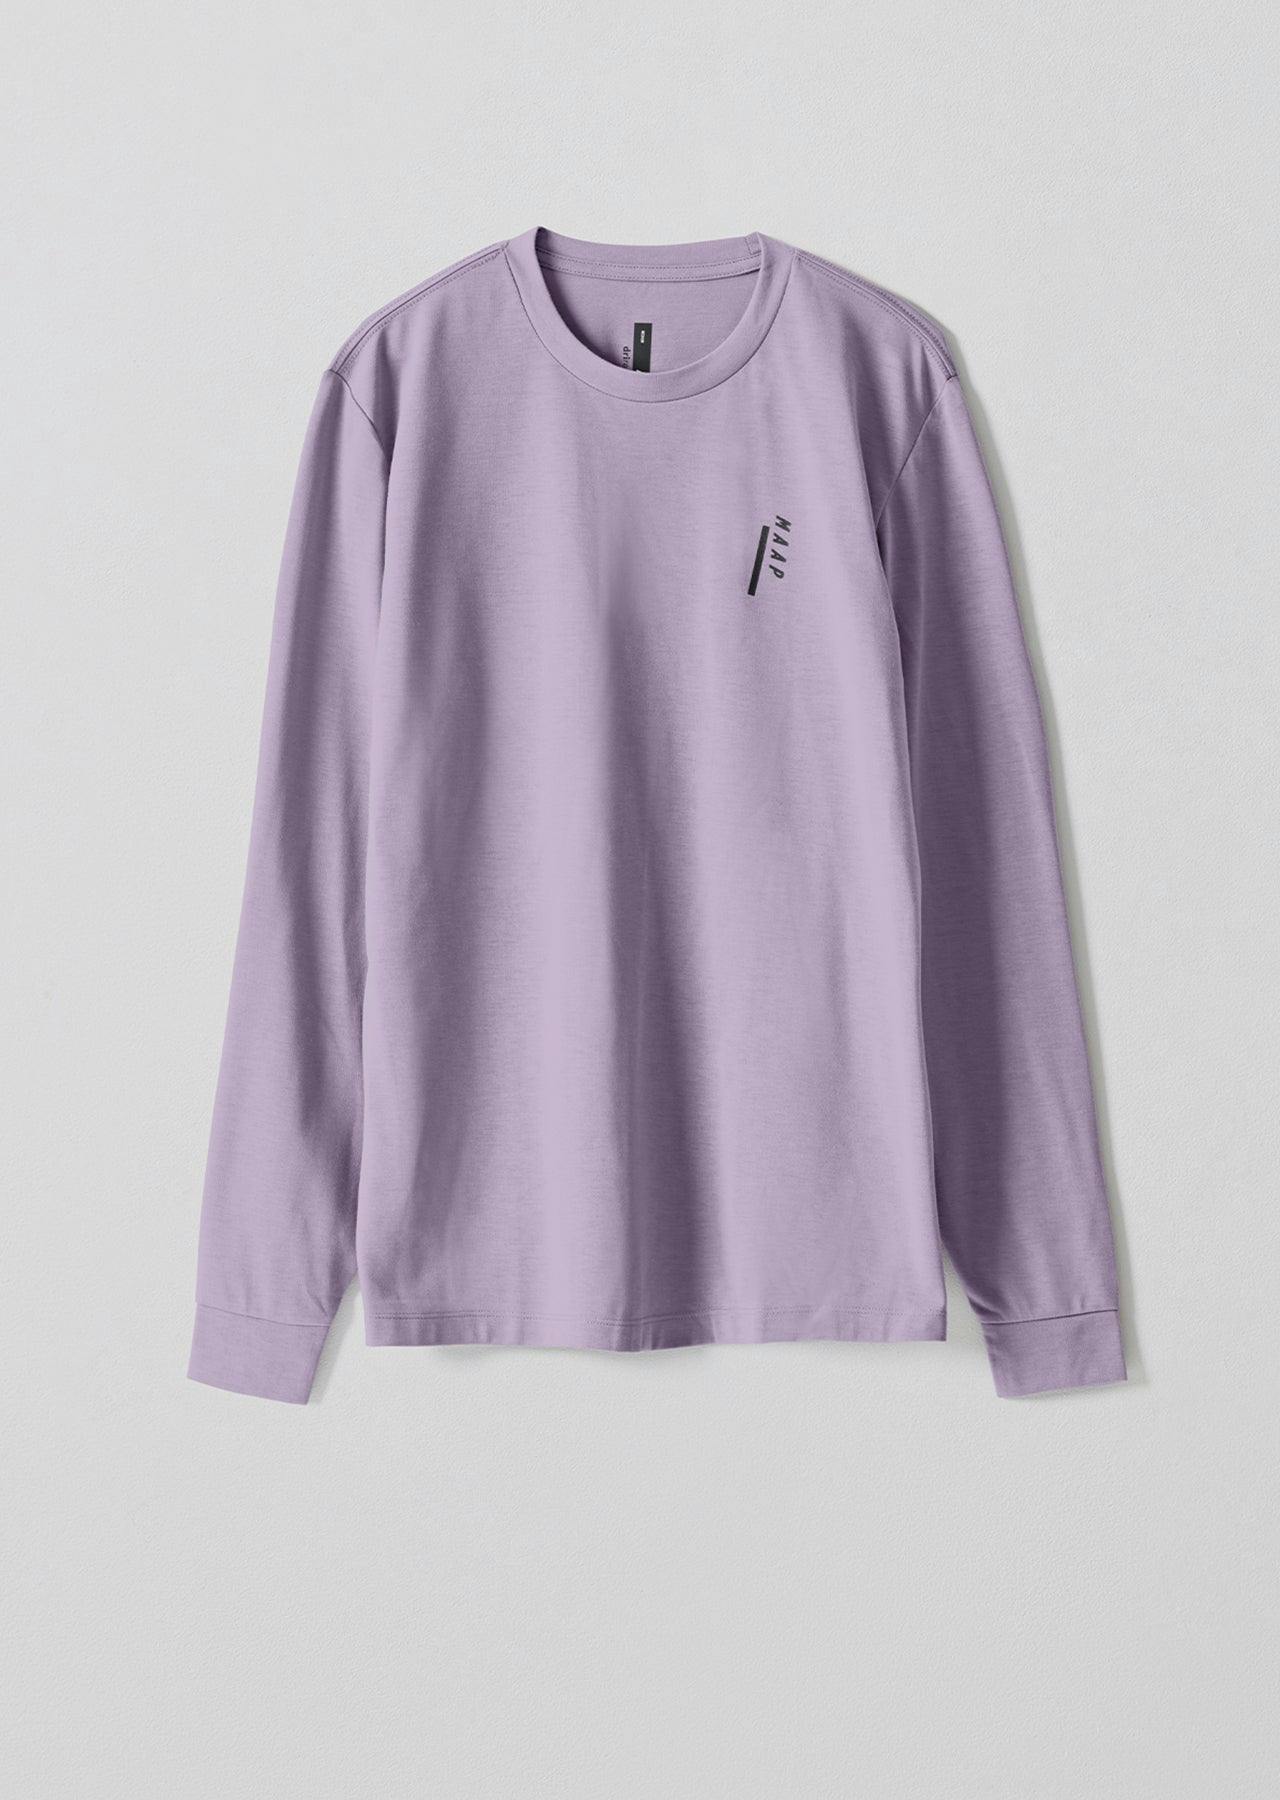 Sparks LS Tee